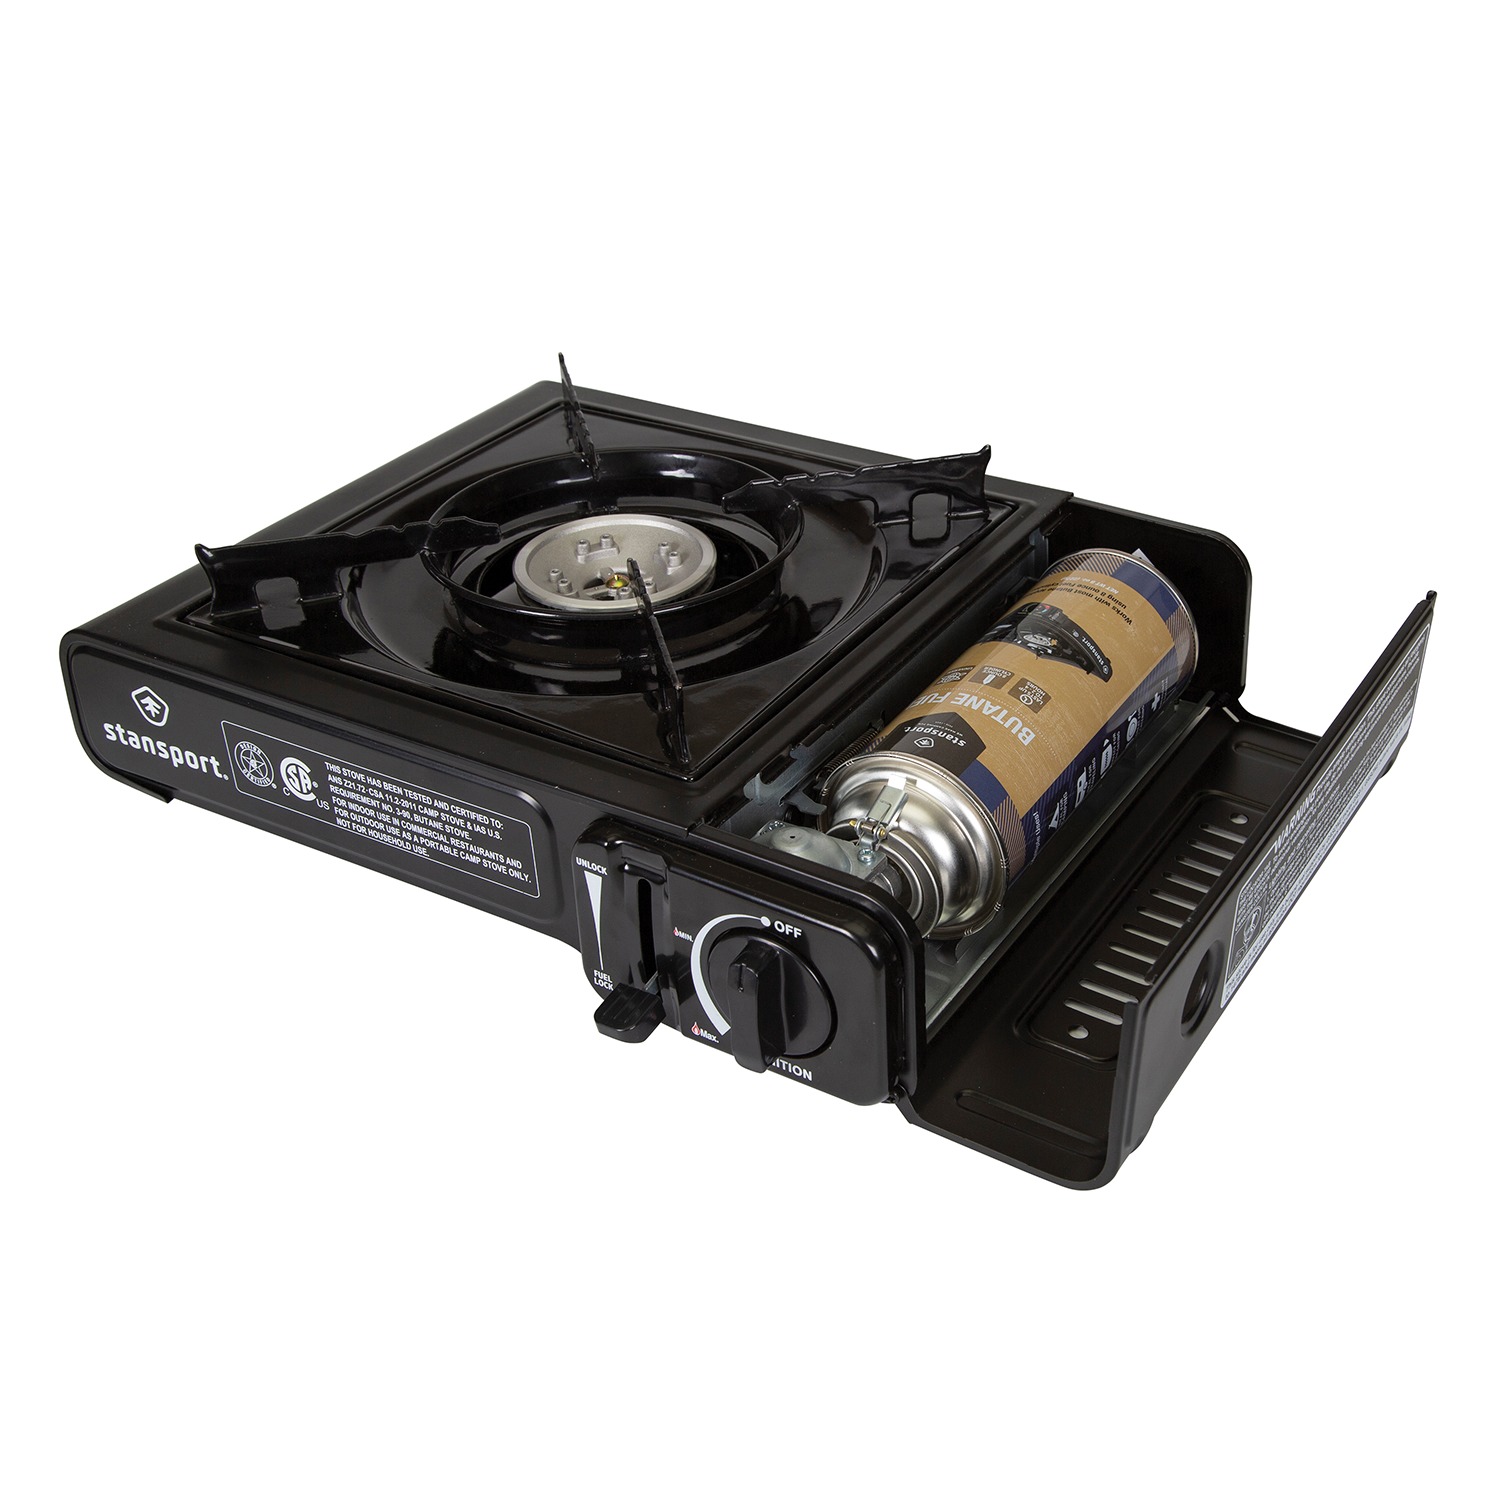 Stansport Portable Outdoor Butane Stove Black 186-100 - image 3 of 4